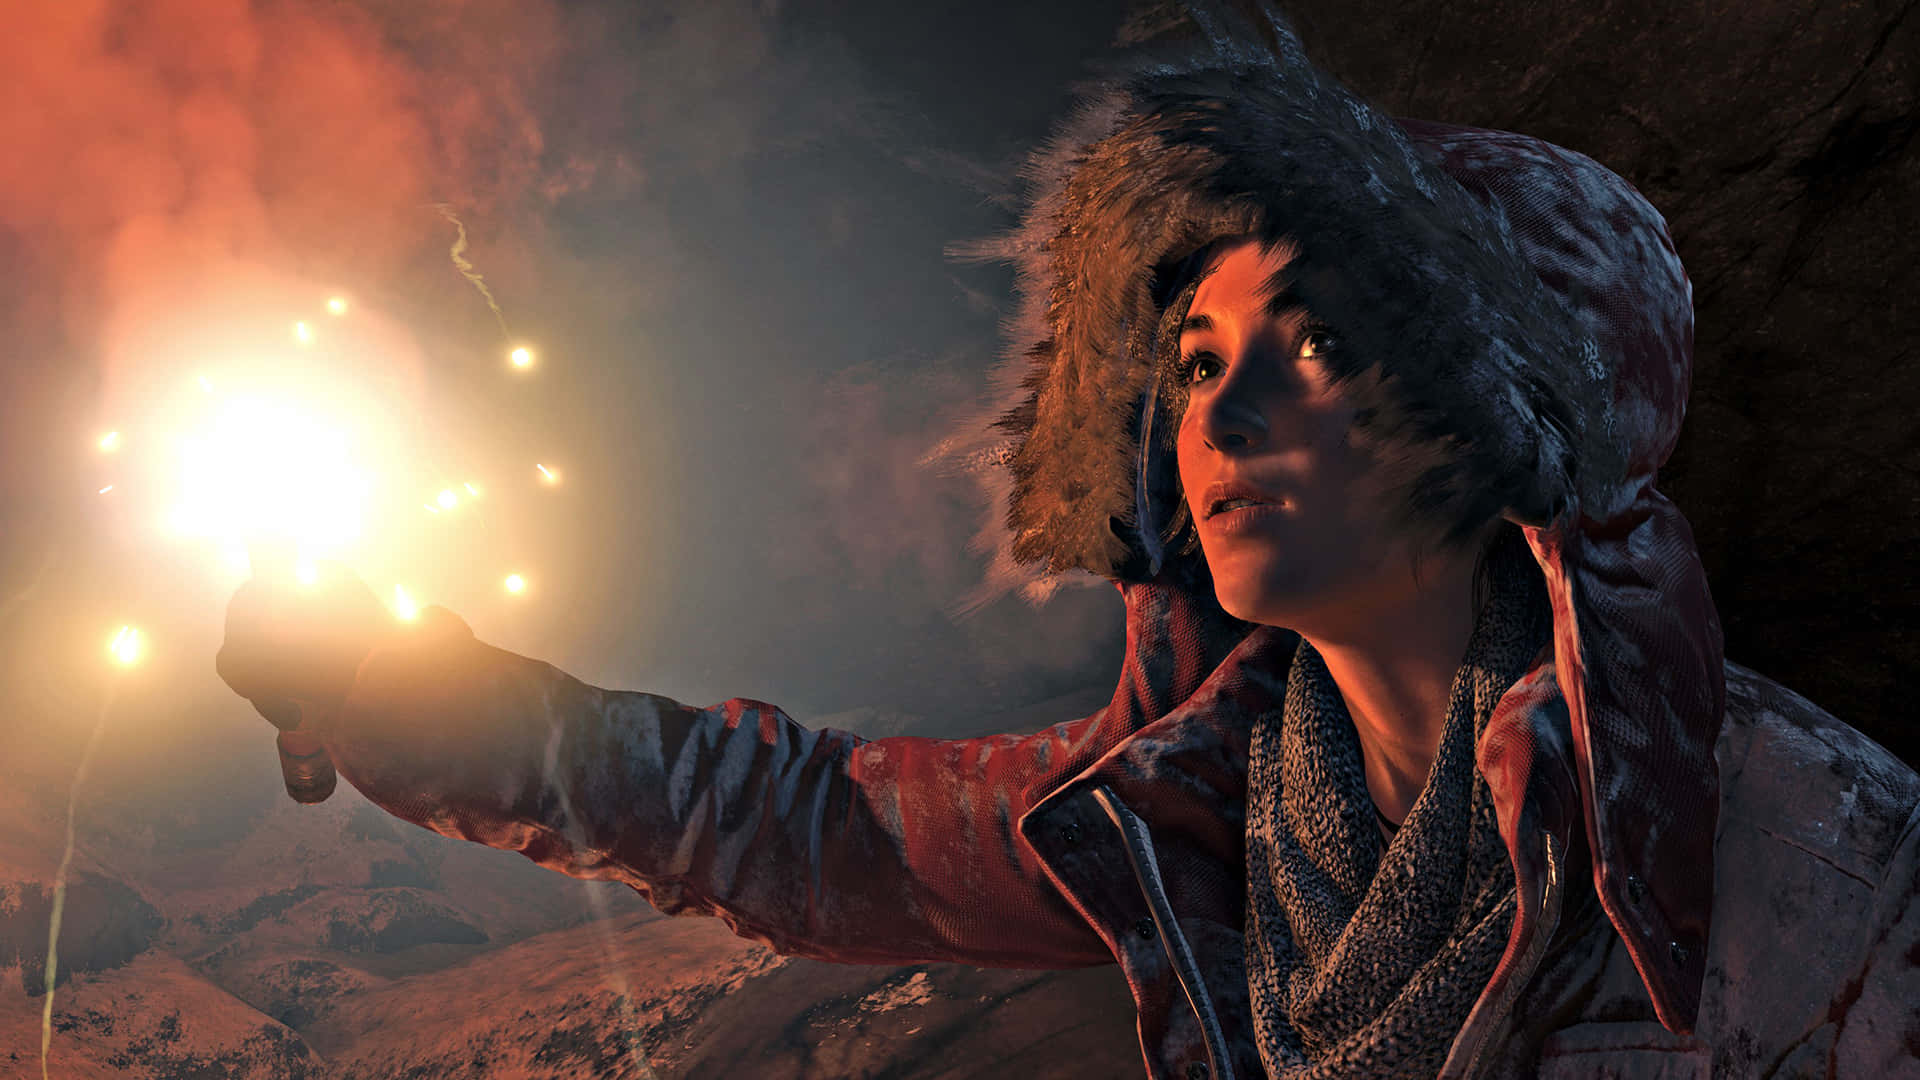 "Explore breathtaking landscapes in Rise Of The Tomb Raider."